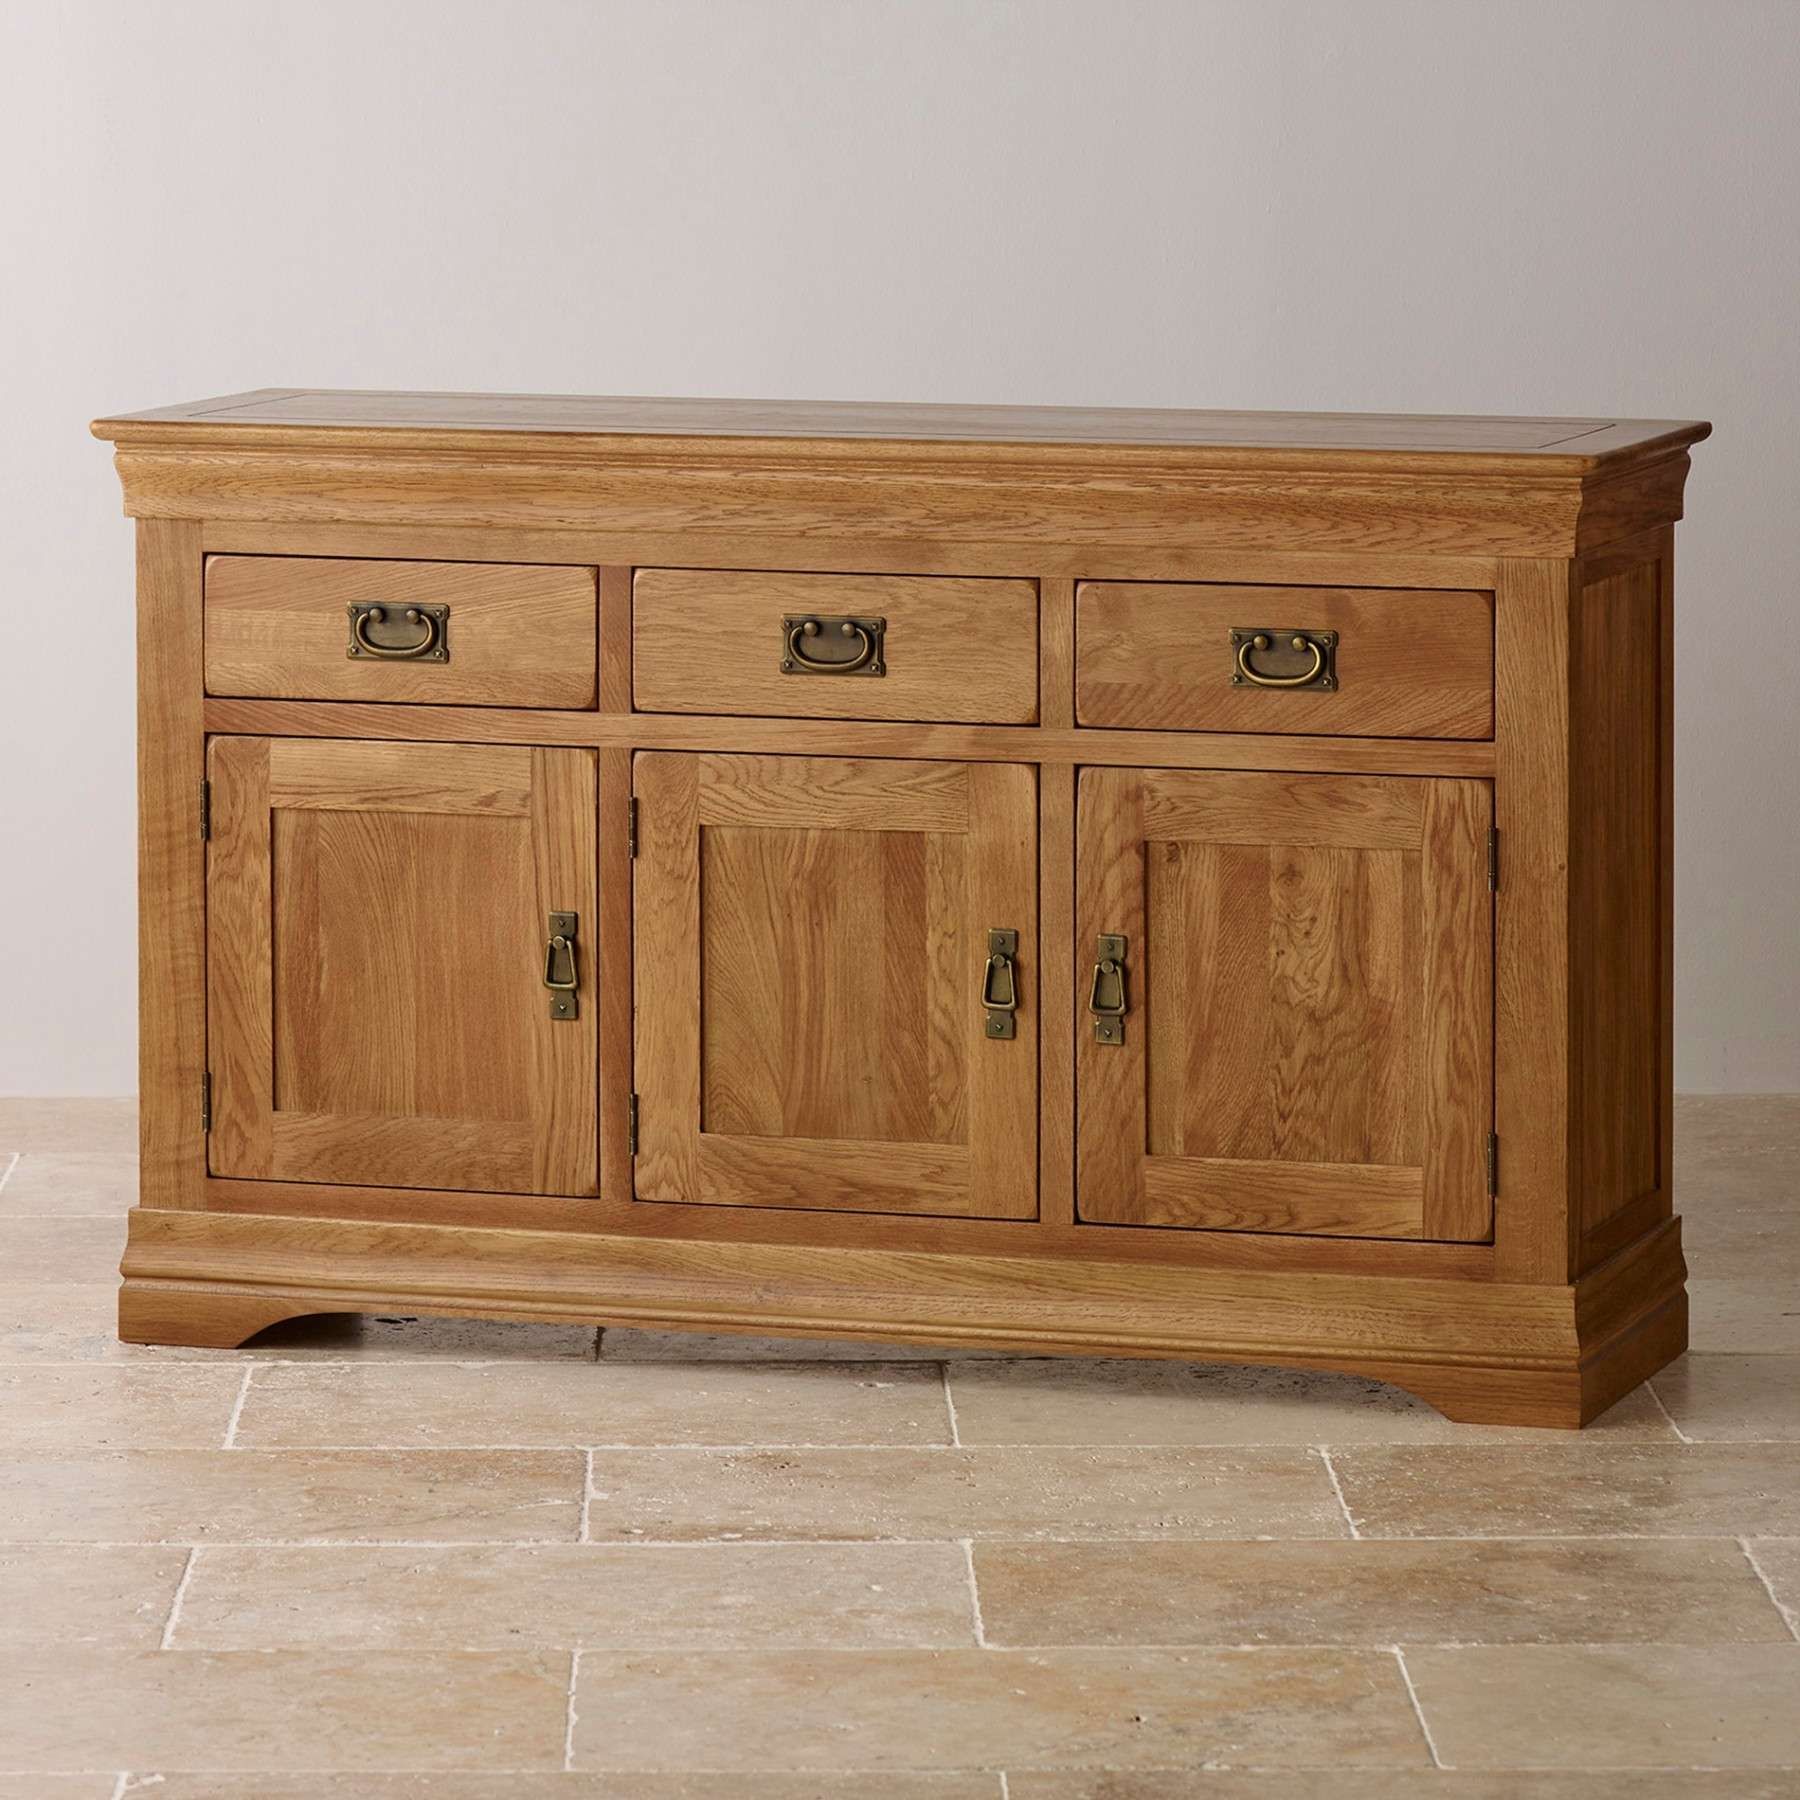 French Farmhouse Rustic Solid Oak Large Sideboard | Sideboards For French Sideboards (View 16 of 20)